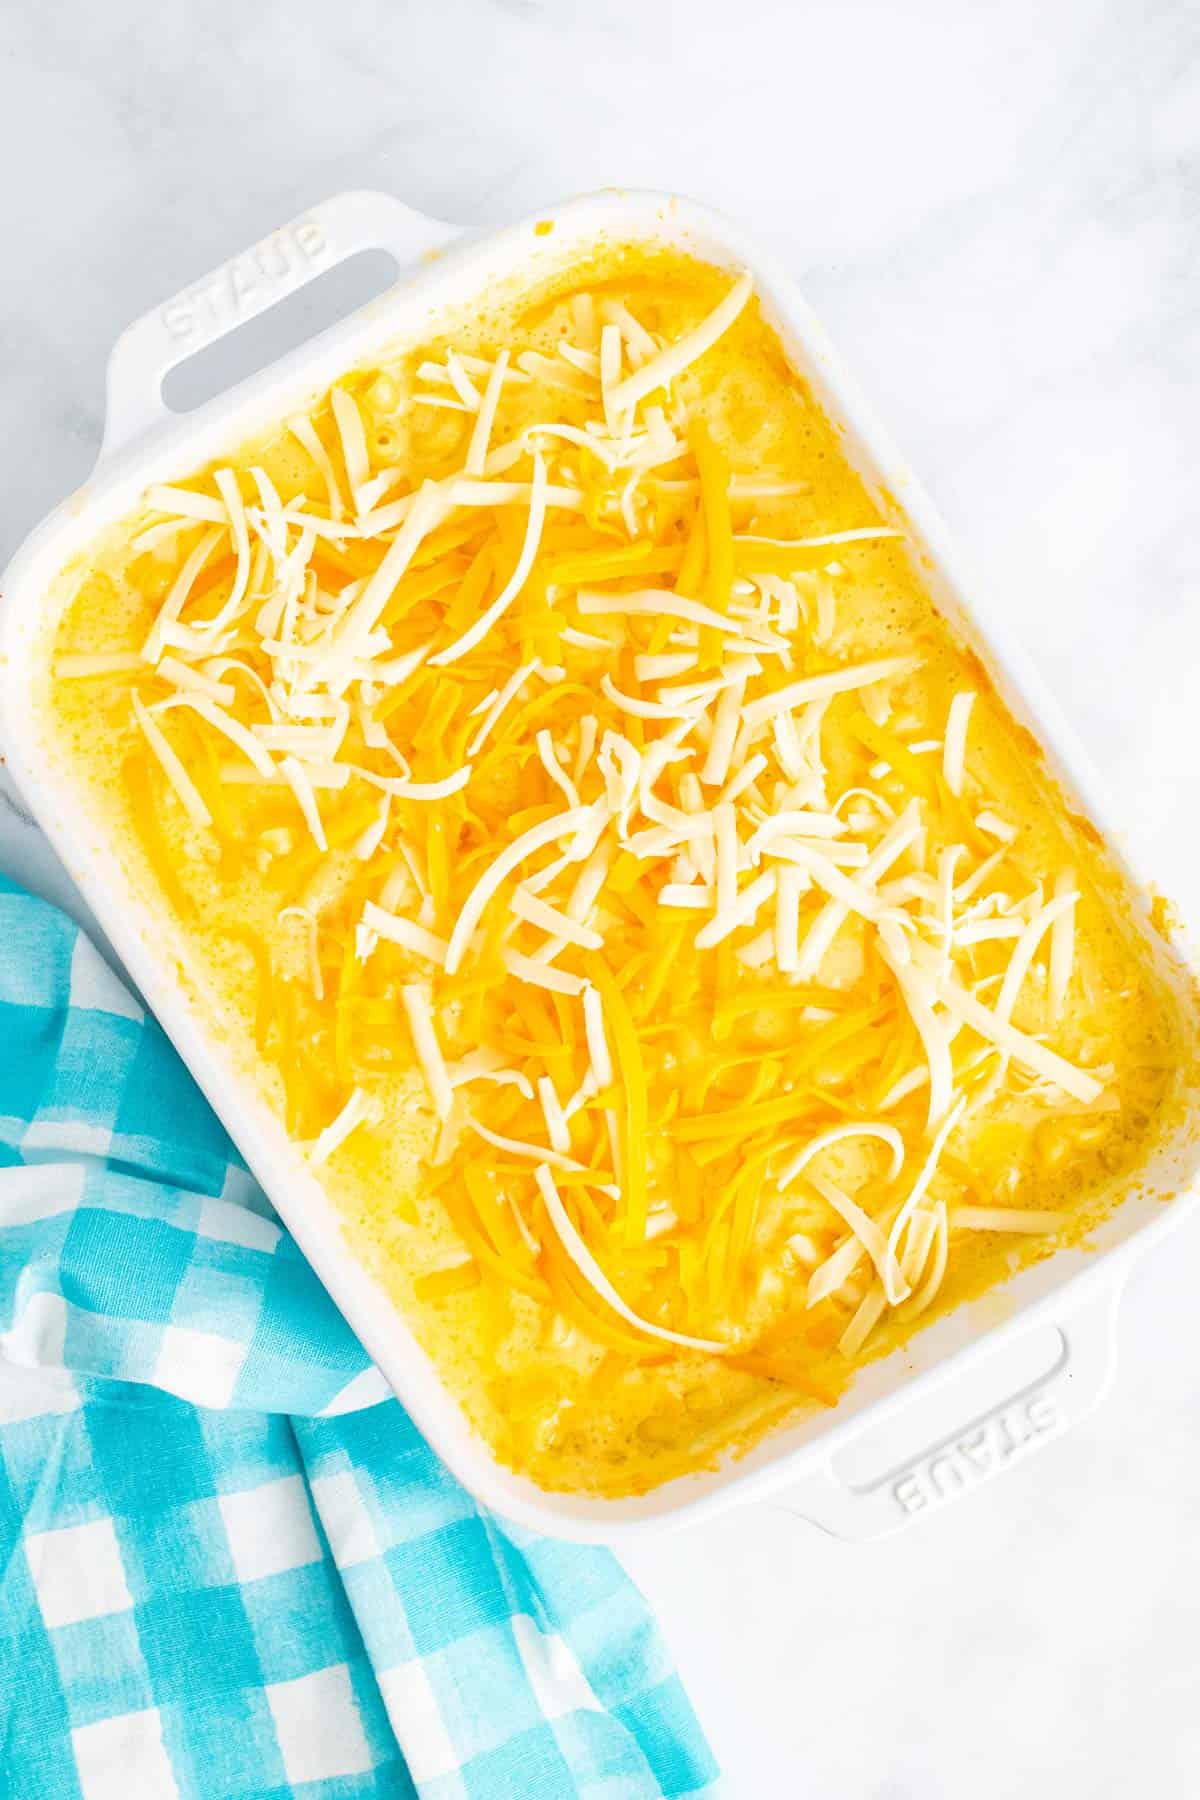 The remaining shredded cheddar and mozzarella cheese are sprinkled on top of the partially baked macaroni and cheese dish.